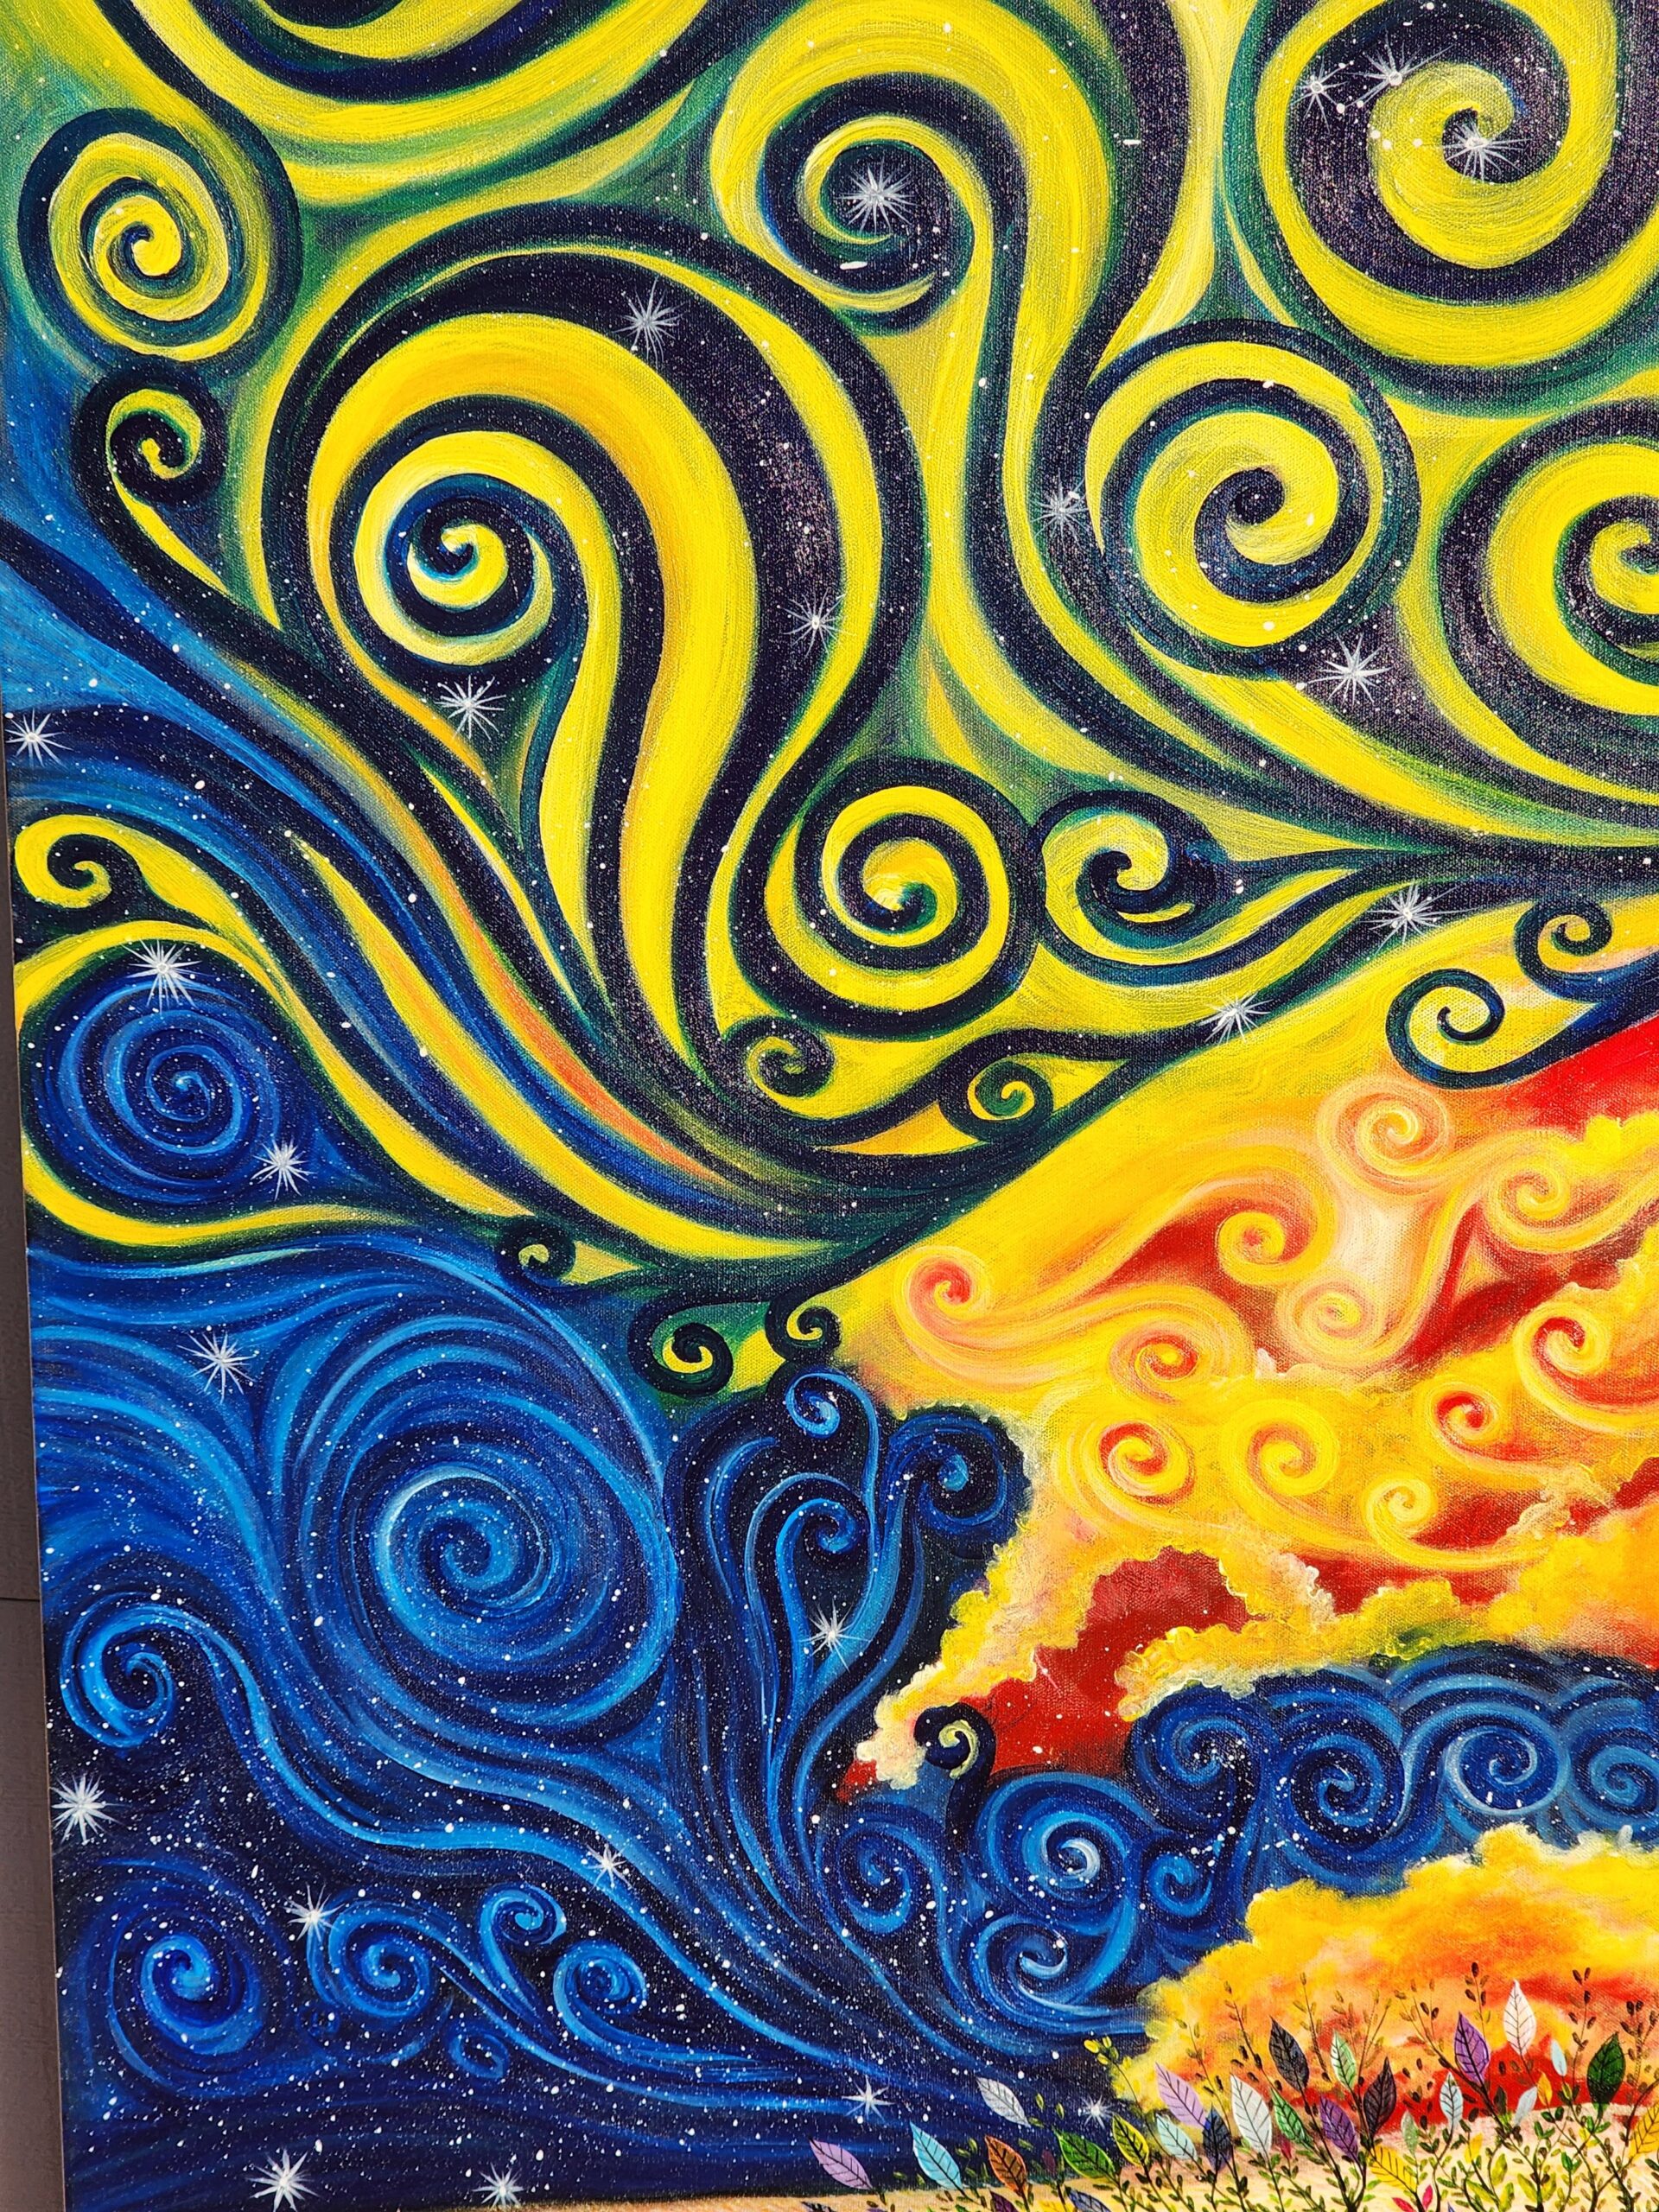 This painting represents the movement of the wind. Every time I see the sky, I see many different shapes of the clouds, which inspired me to paint them in many colors. The wind hits my face, and then it makes me want to  paint it in a very surrealist style. And then at night, I see the stars far away fading almost forming a long cloud, the galaxy. I love seeing how the wind bends the grass, kissing the ground and the tree of life, dancing with the rhythm of the wind.